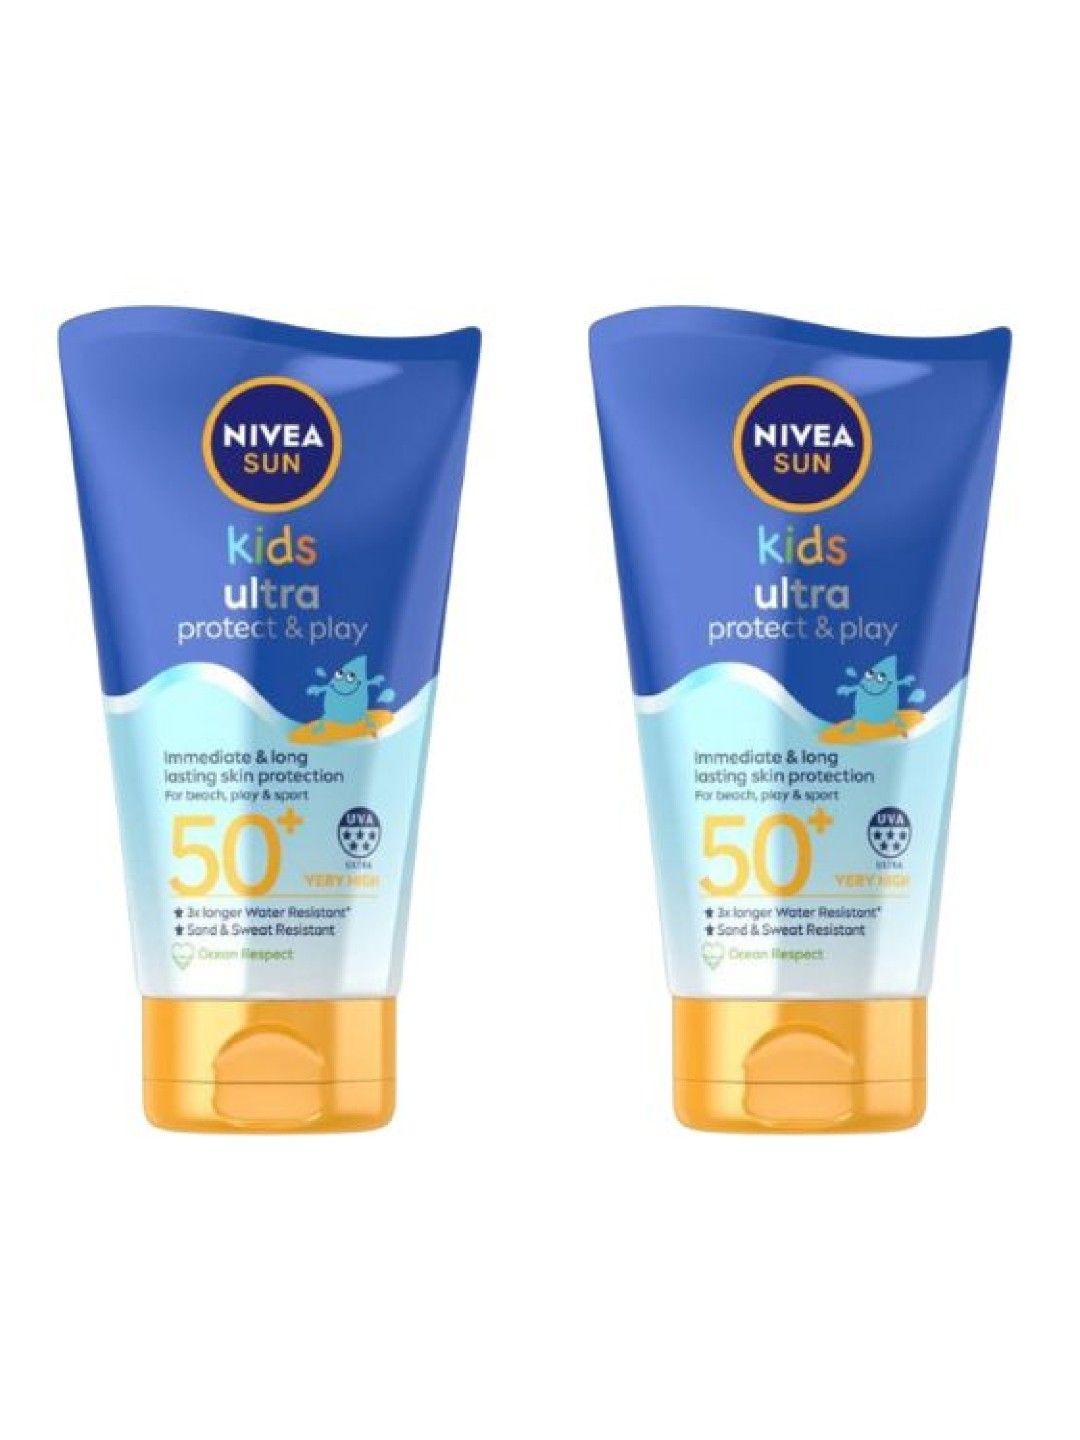 NIVEA Pack of 2 Sun Kids Ultra Protect & Play Sunscreen with SPF 50, 150ml